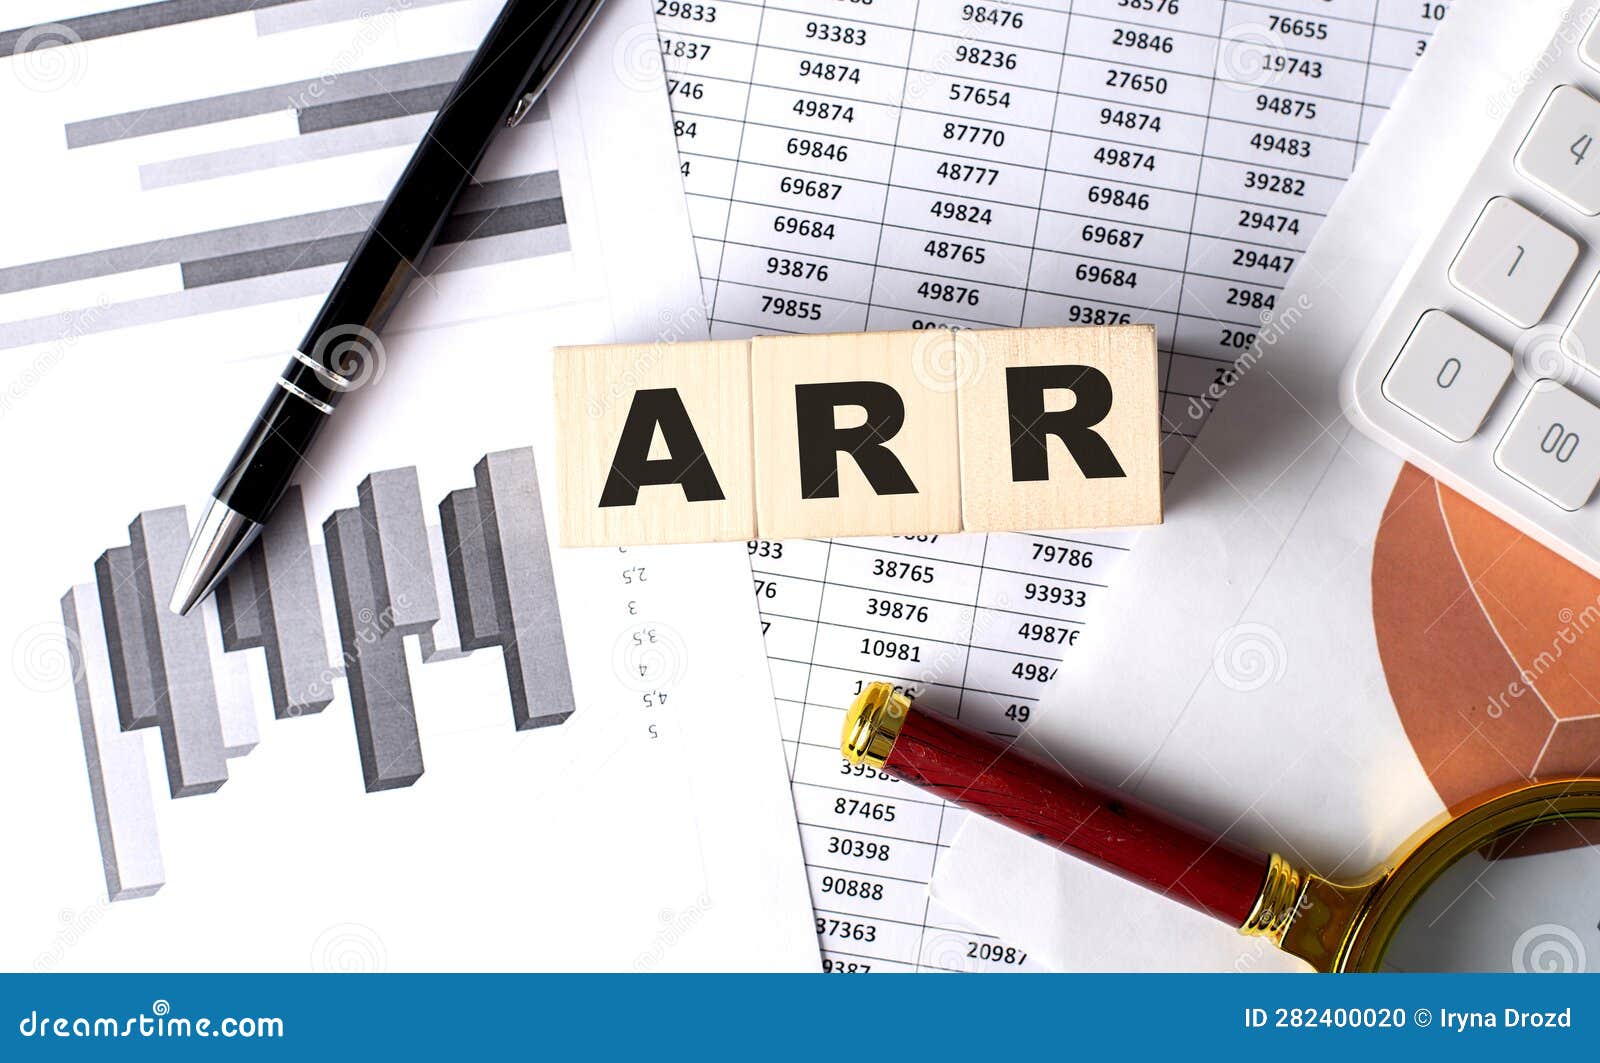 arr text on wooden block on graph background with pen and magnifier